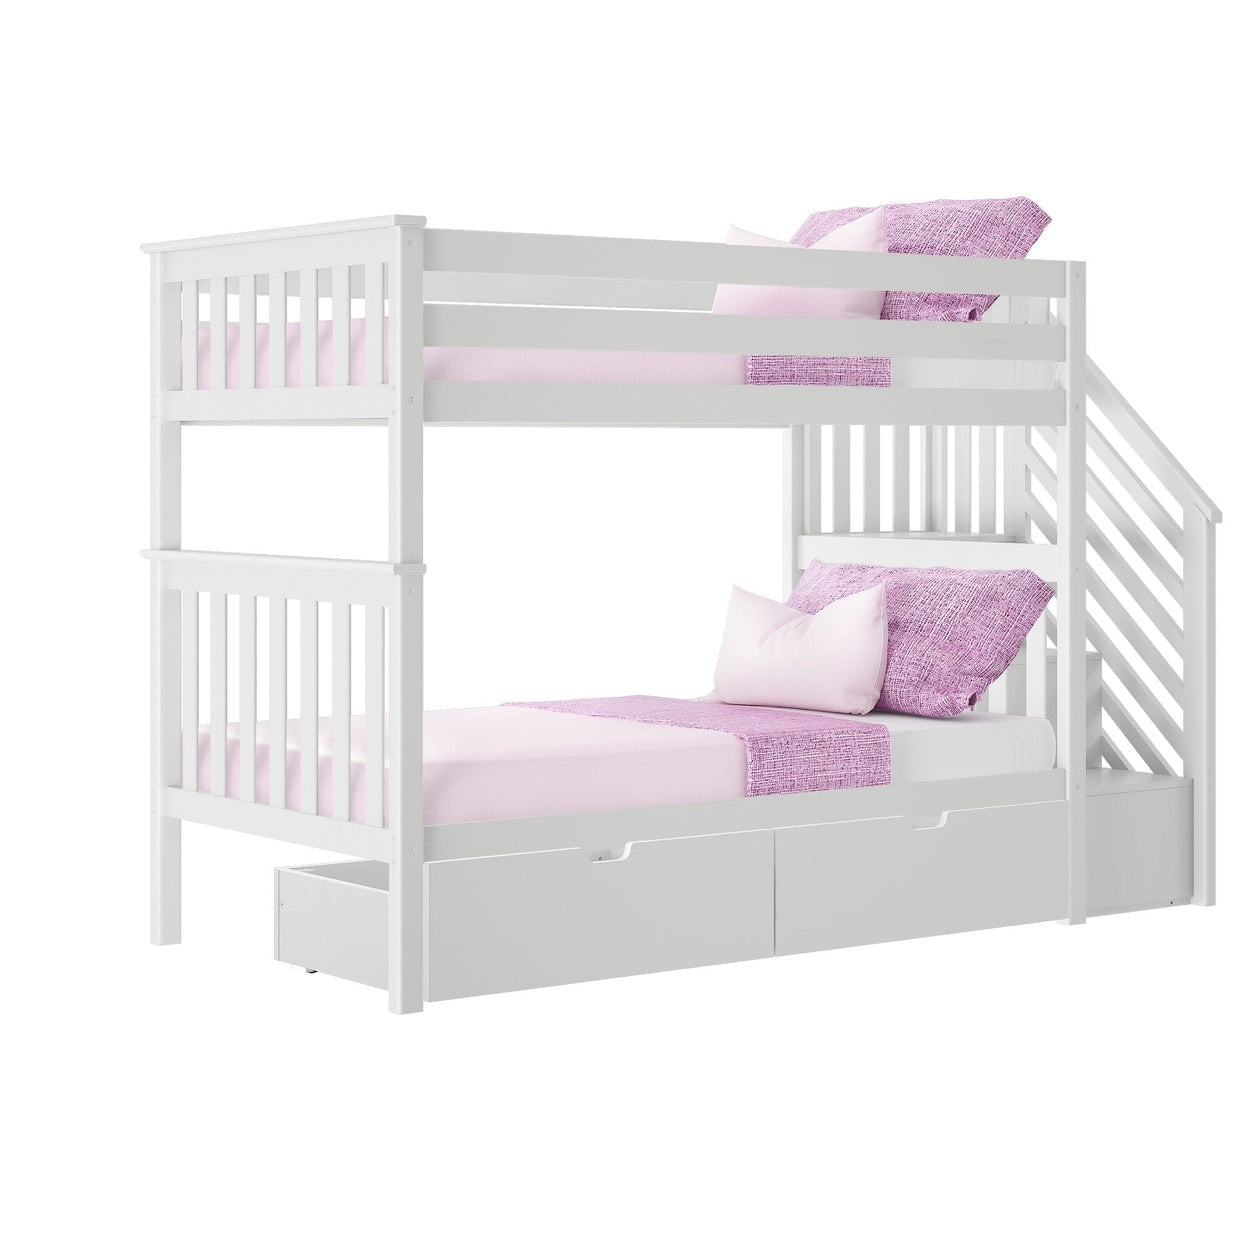 187205-002 : Bunk Beds Twin over Twin Staircase Bunk with Storage Drawers, White